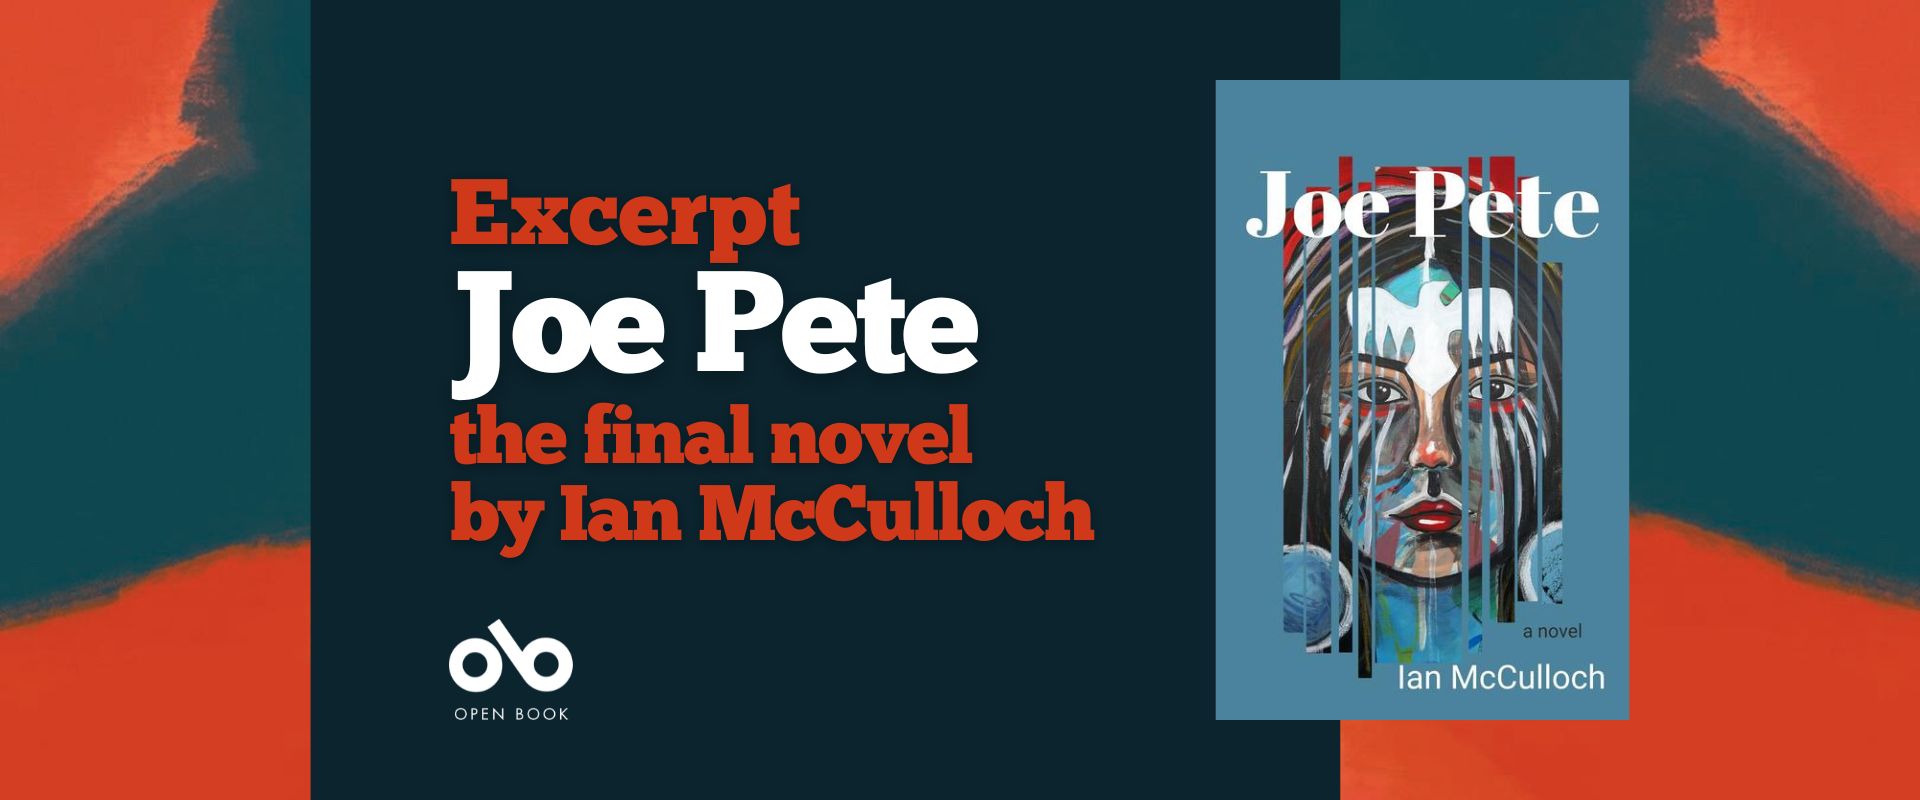 banner image with the cover of Ian McCulloch's Joe Pete and text reading Excerpt Joe Pete the final novel by Ian McCulloch. Open Book logo bottom left